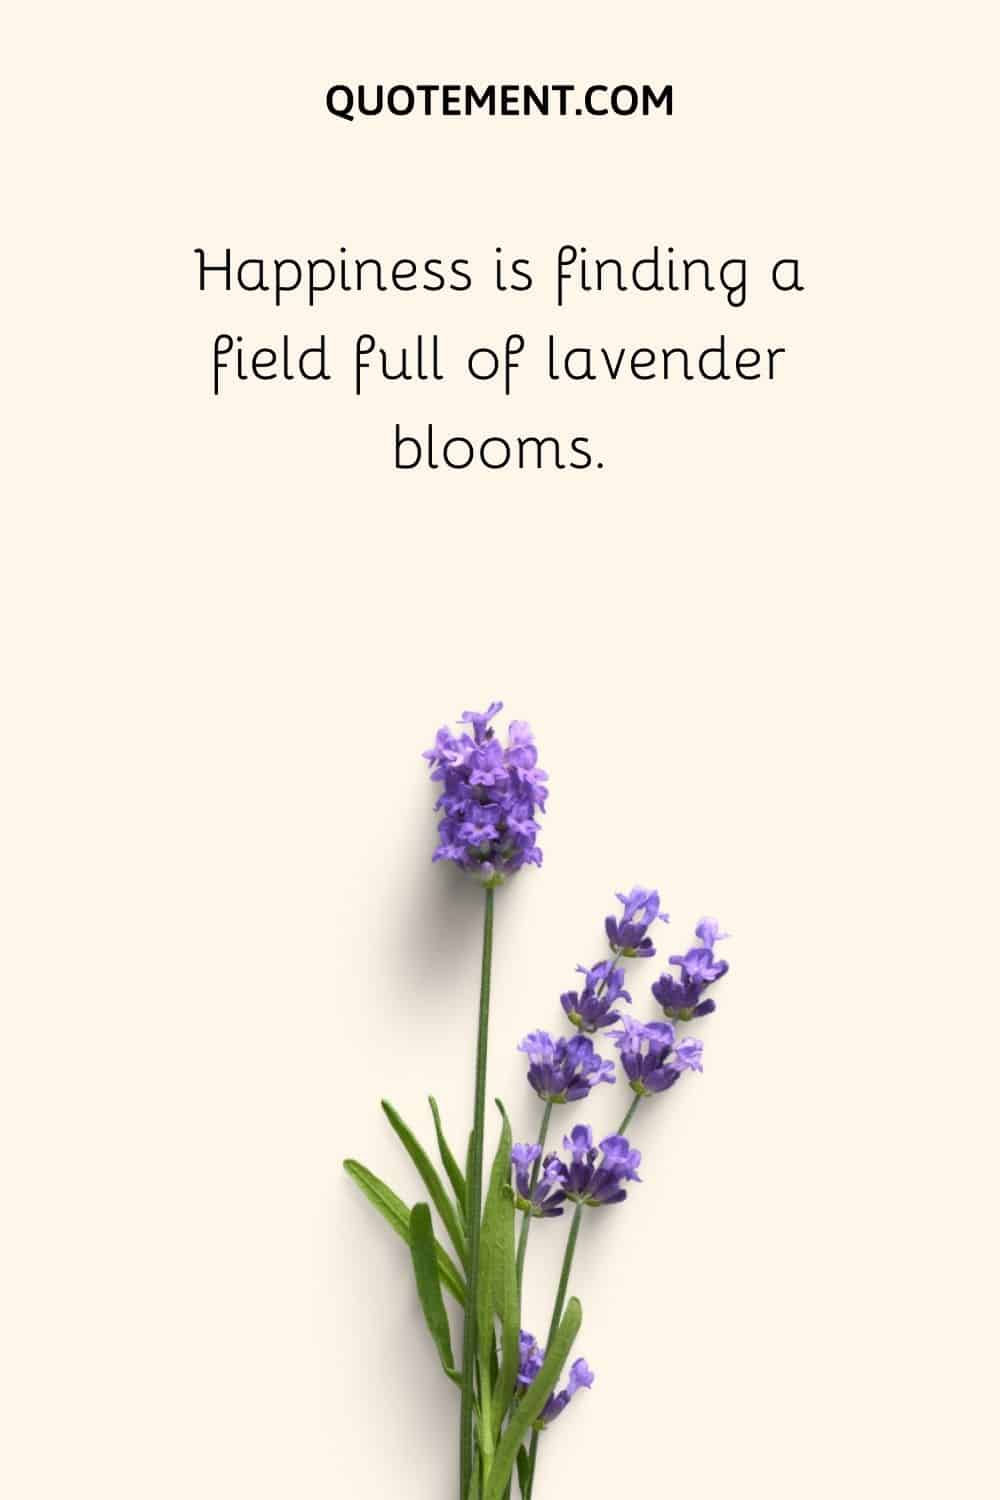 Happiness is finding a field full of lavender blooms